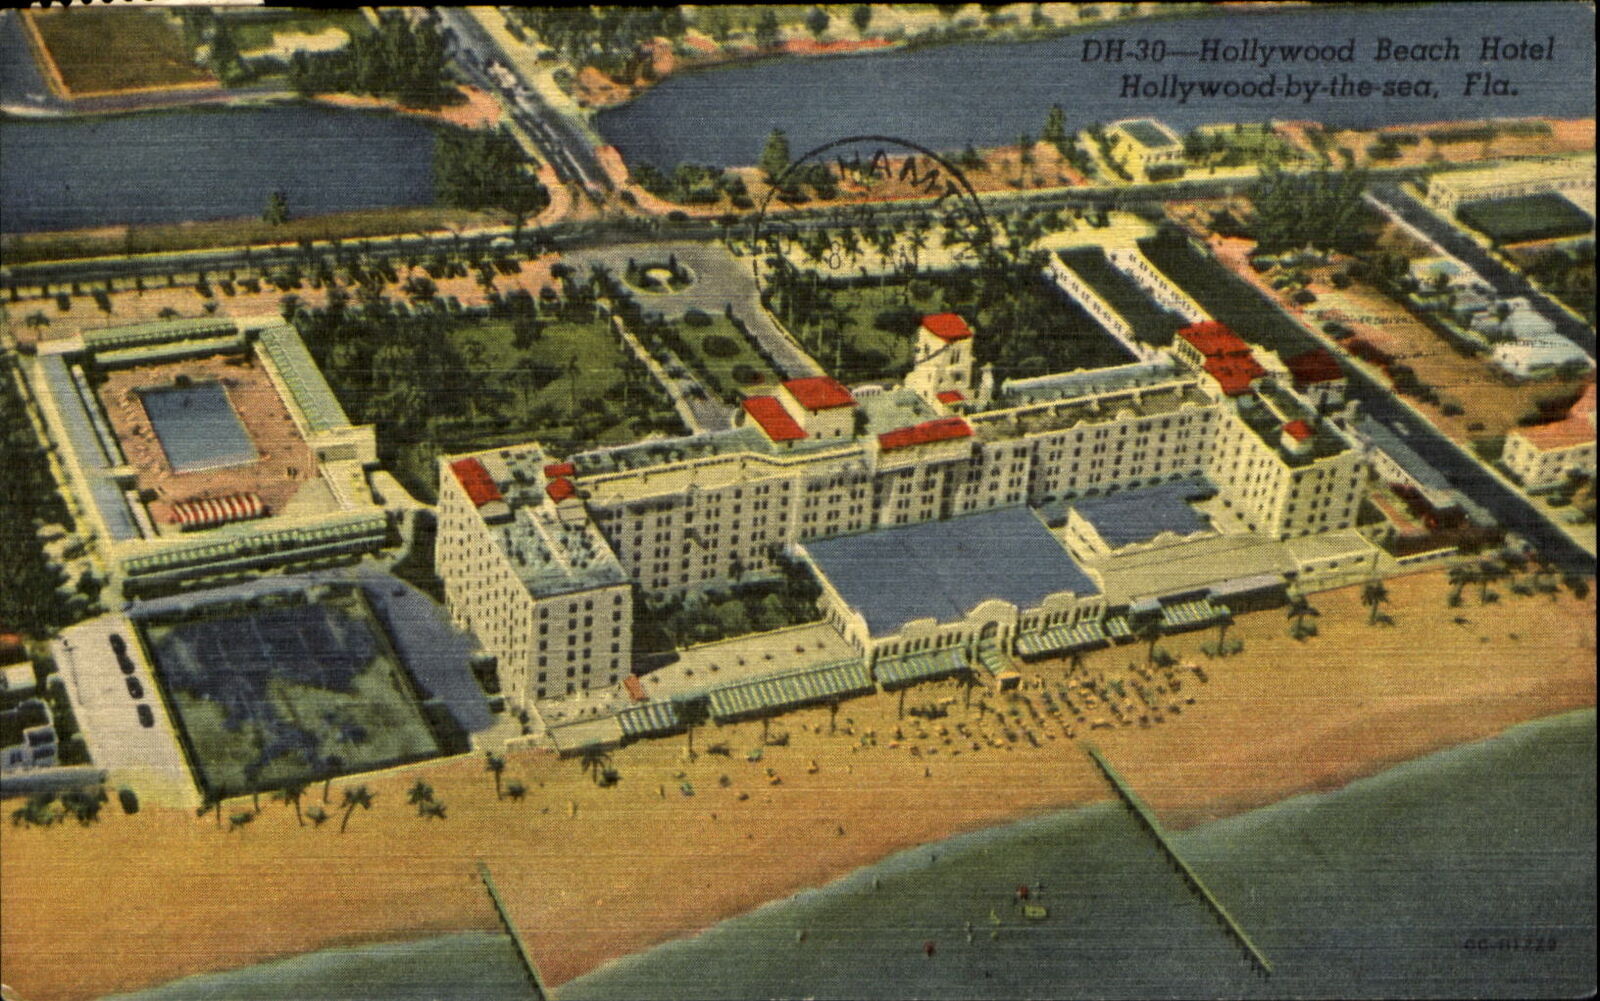 Hollywood Beach Hotel ~aerial view ~ Hollywood by the Sea Florida FL ~ 1950s